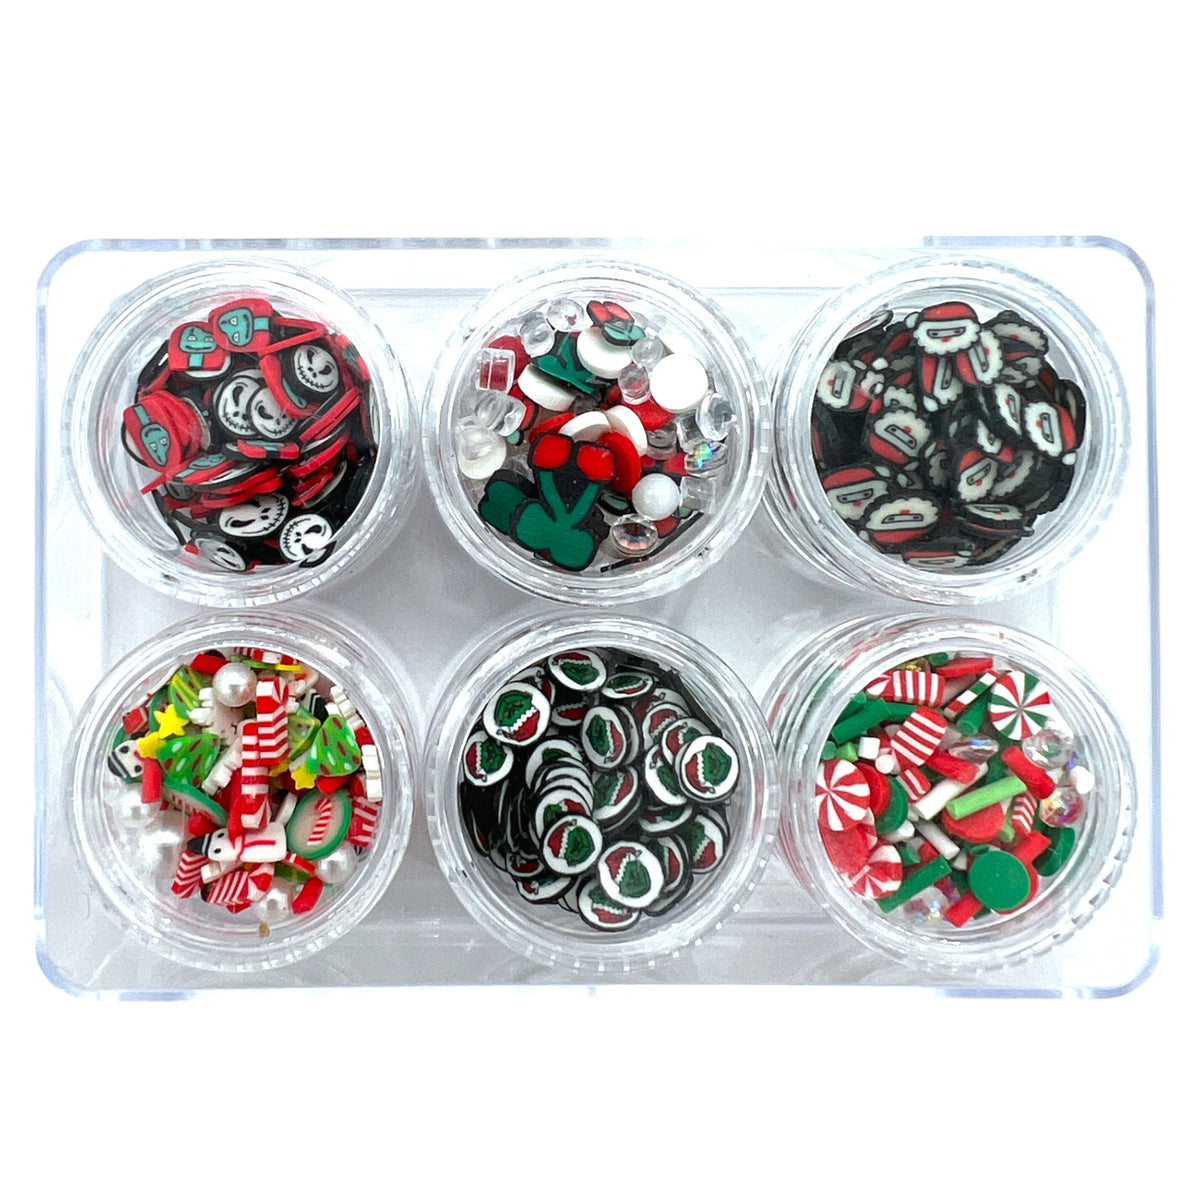 Christmas Is Coming Sooner Than You Think Combo Set of Polymer Clay Pieces for Epoxy and UV Resin Art